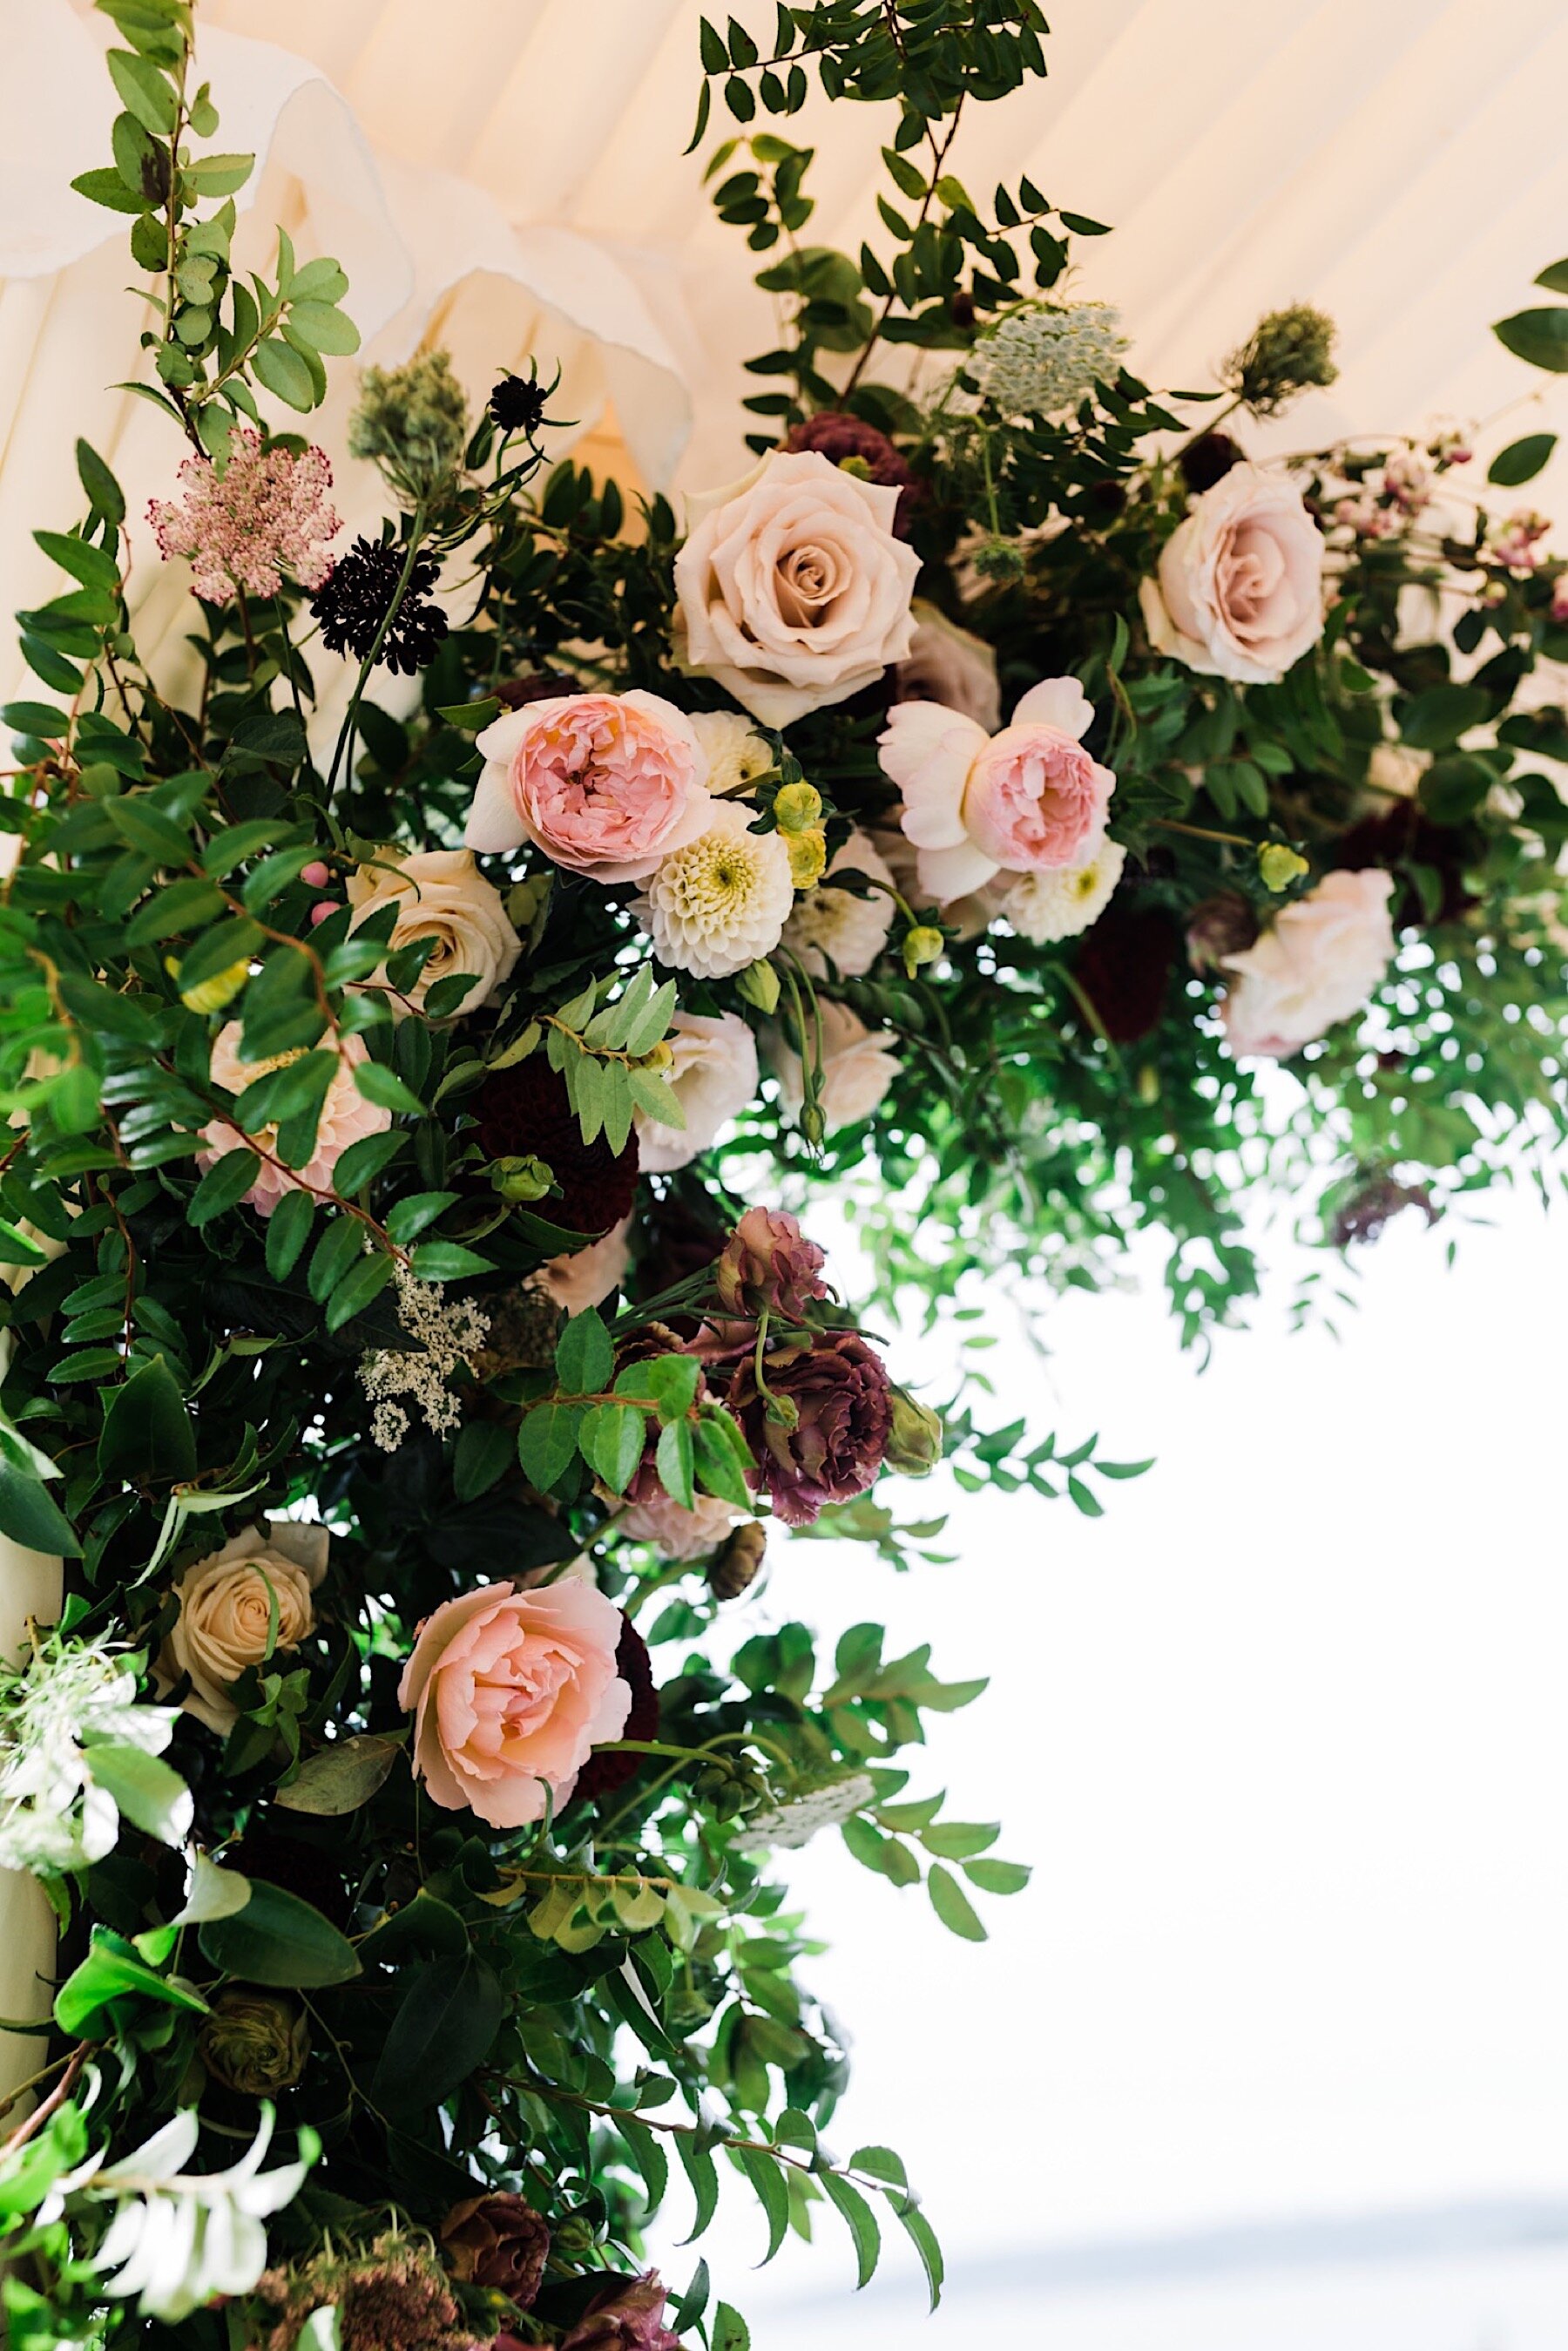 06_shaxton-ngo-235_A_Woodmark_floral_top_with_Florist_Gather_Design_from_Company_at_romantic_the_wedding_lush_Seattle_Wedding_design_Hotel.jpg